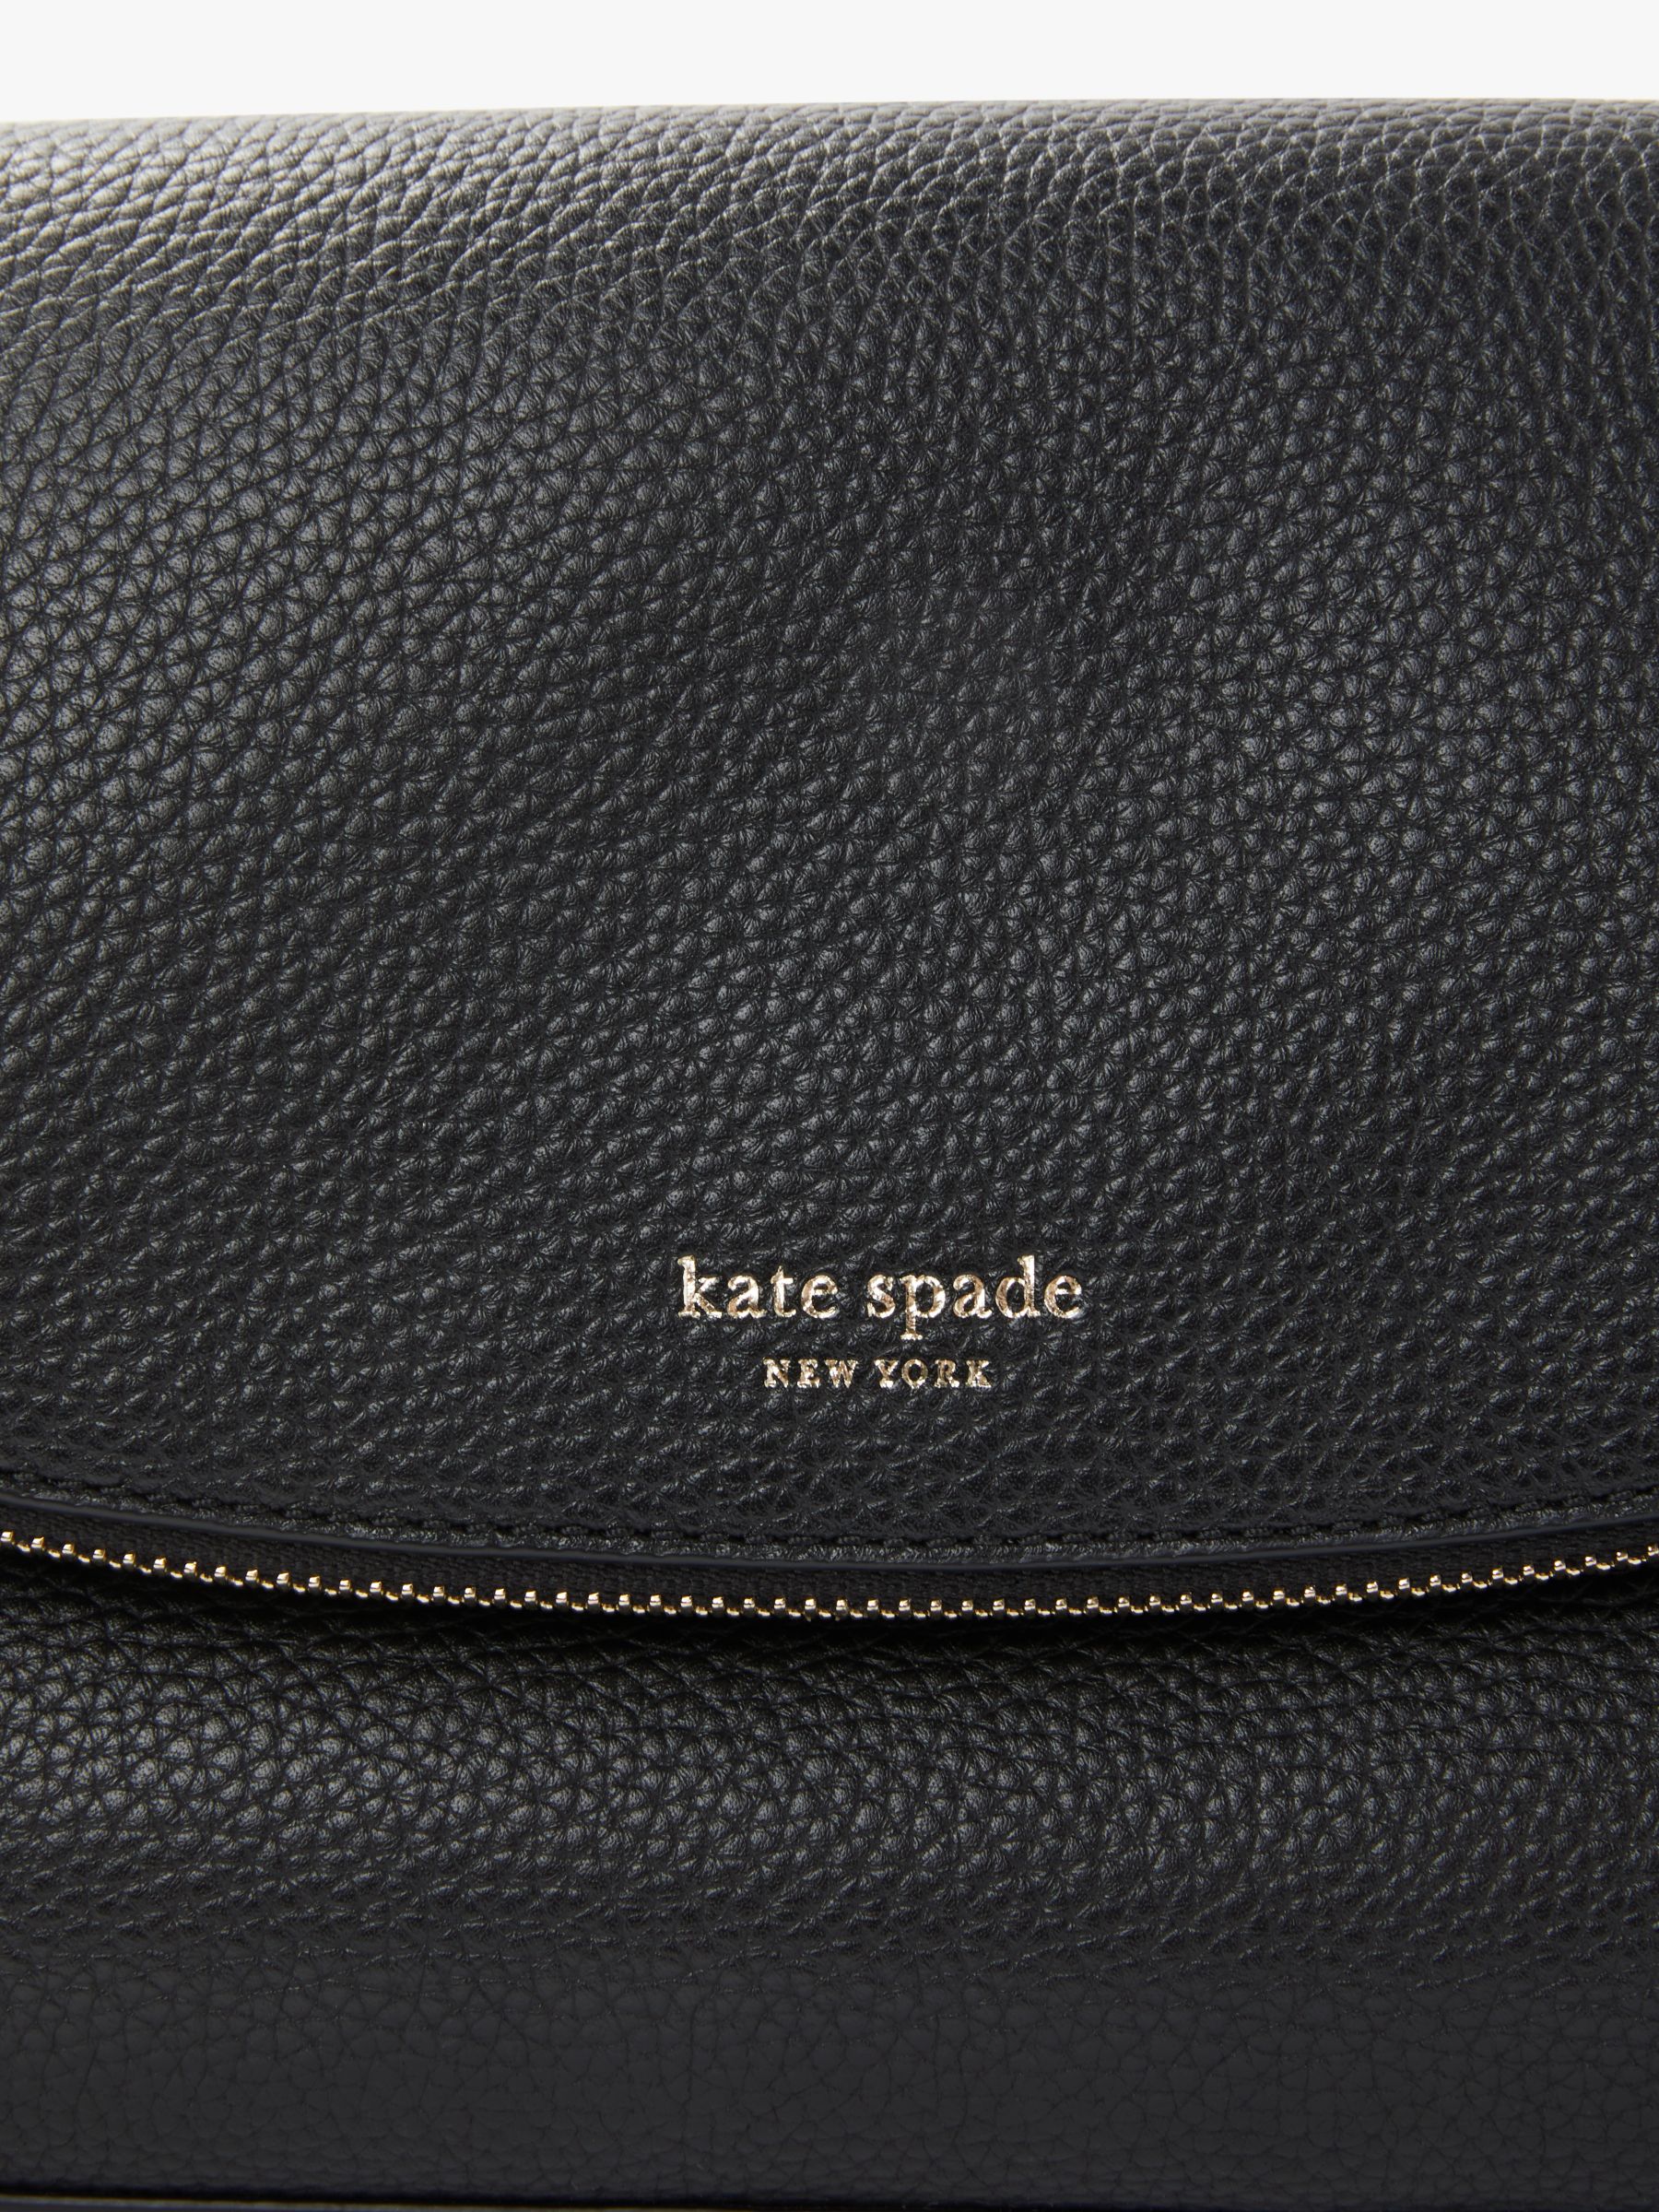 kate spade new york Polly Leather Large Flap Over Cross Body Bag, Black at John Lewis & Partners